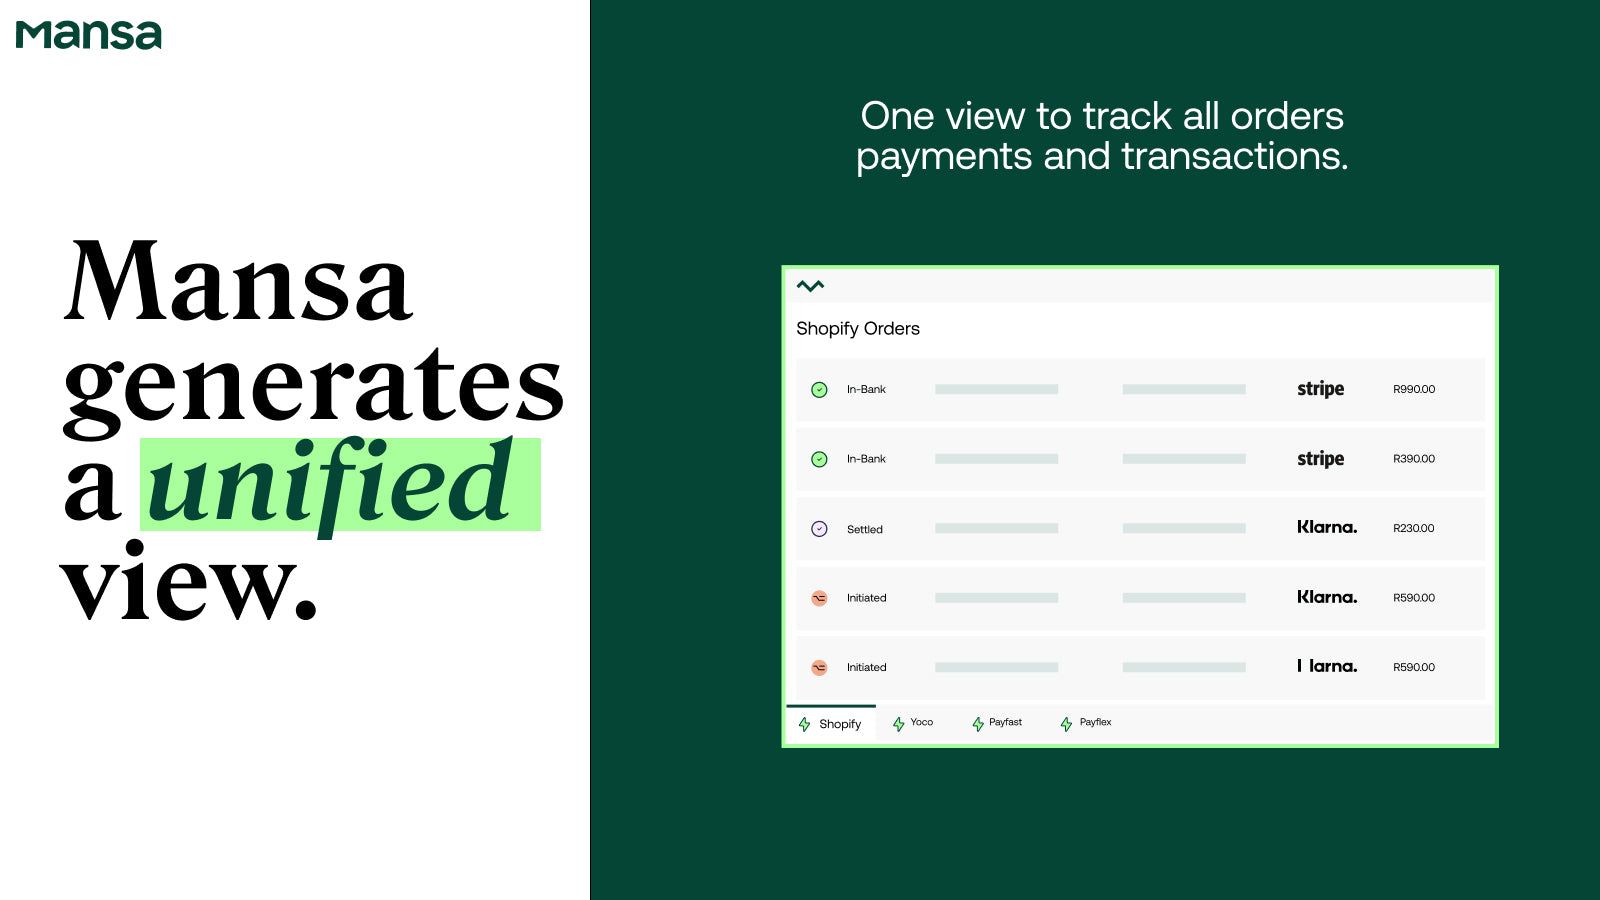 Mansa unifies transactions for each order in detail.